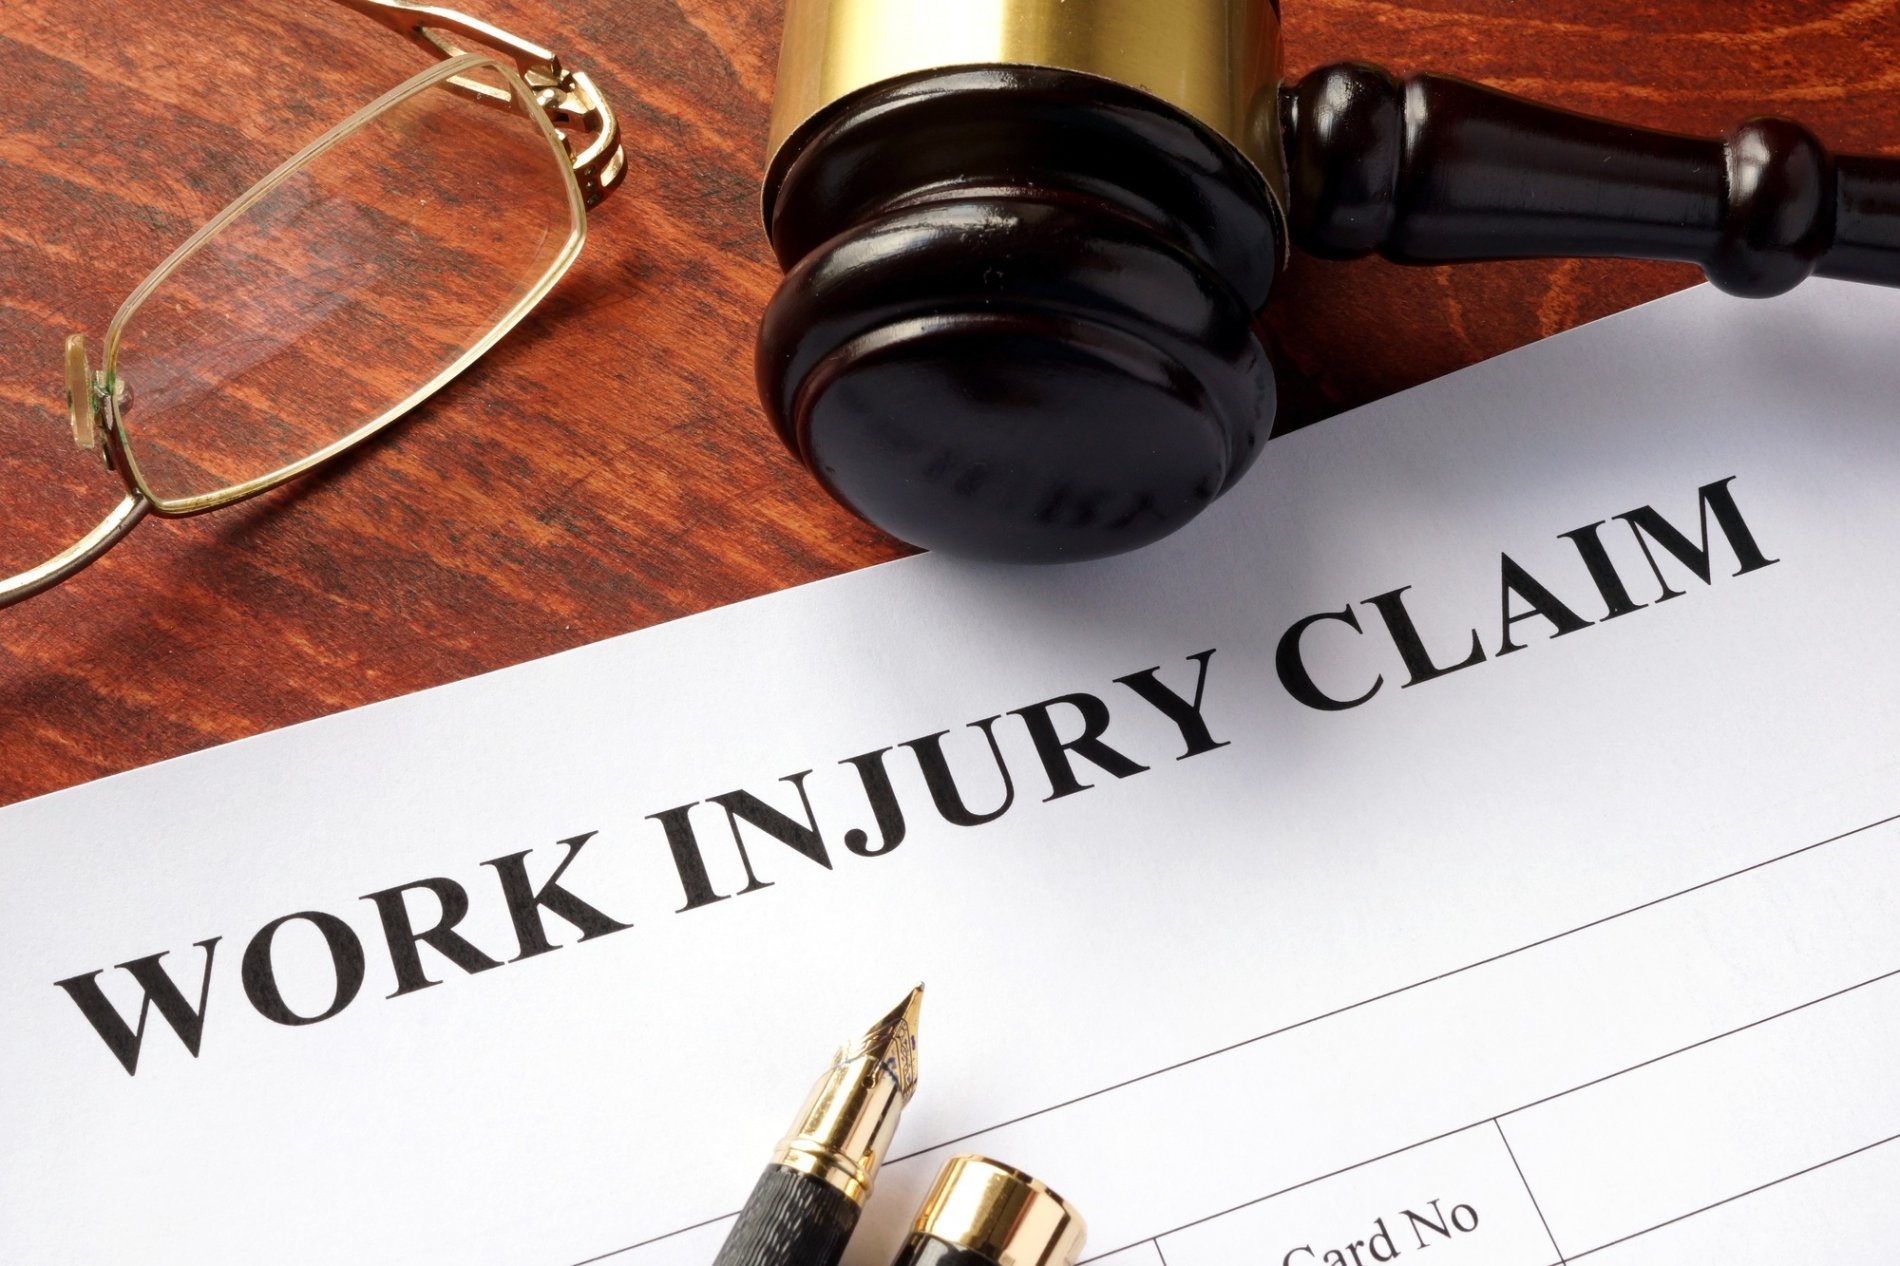 Do I Need Workers Compensation Insurance and When Should I Get It?